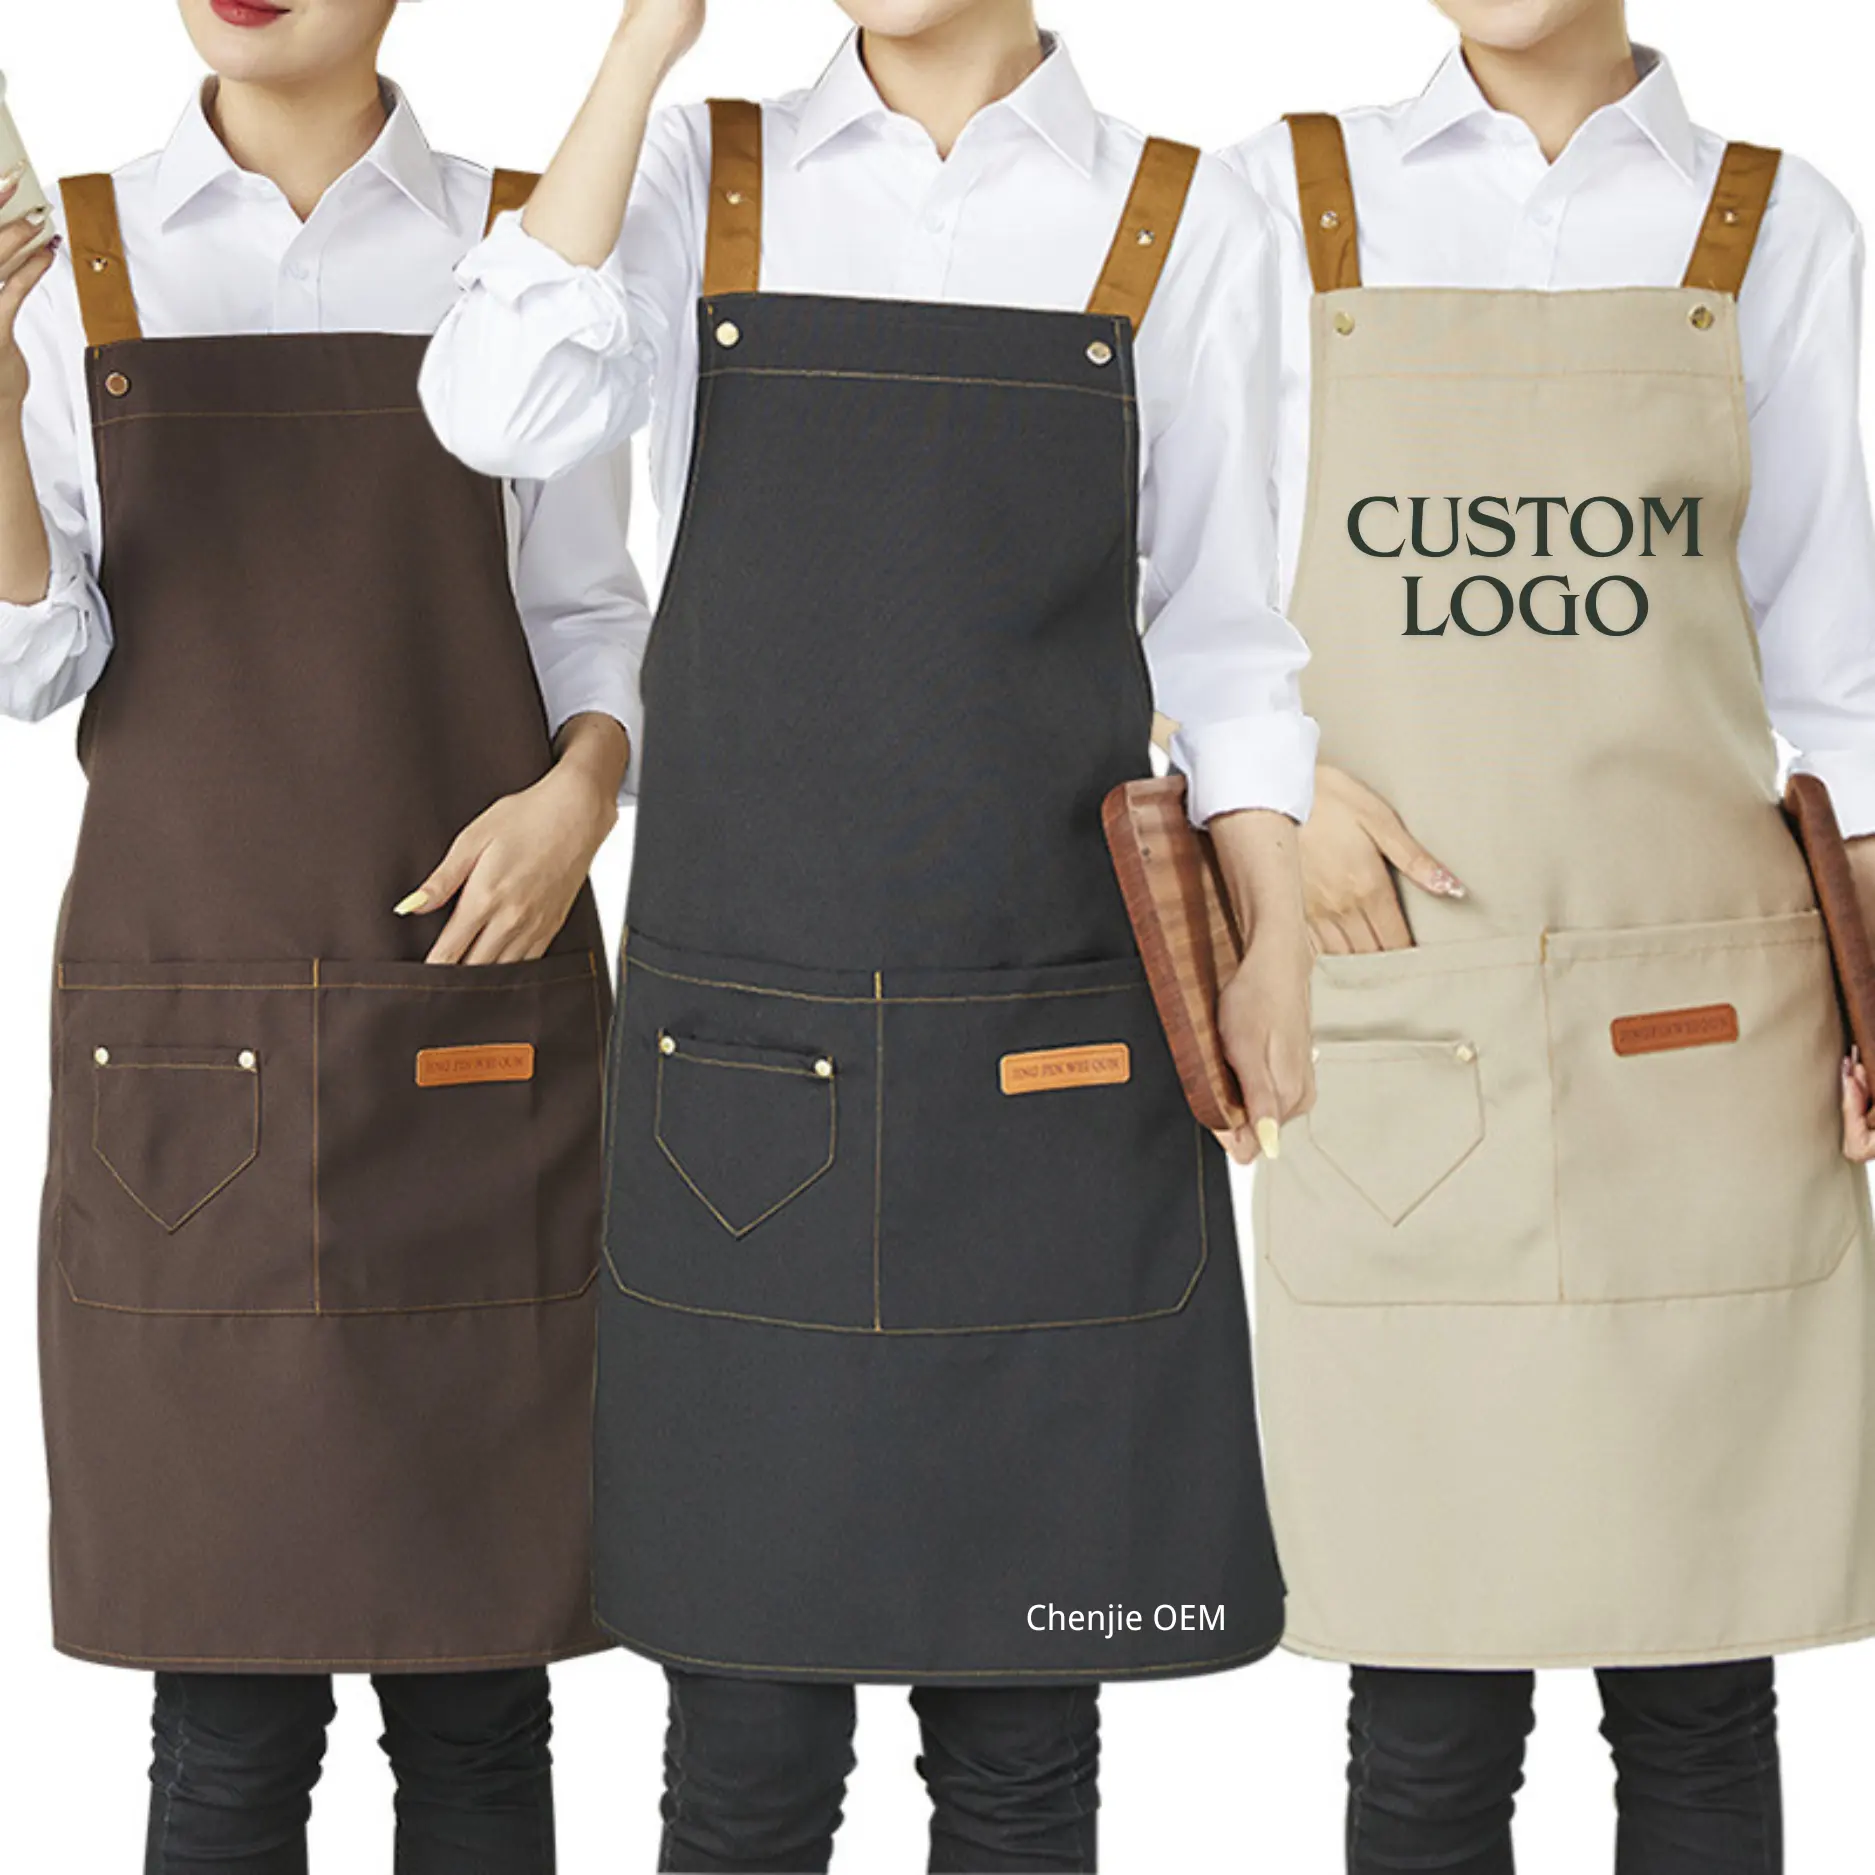 Custom Logo Waterproof Work Kitchen Canvas Apron With Pockets Uniforms For Waiters Waitress Cafes Nail Uniform Grill